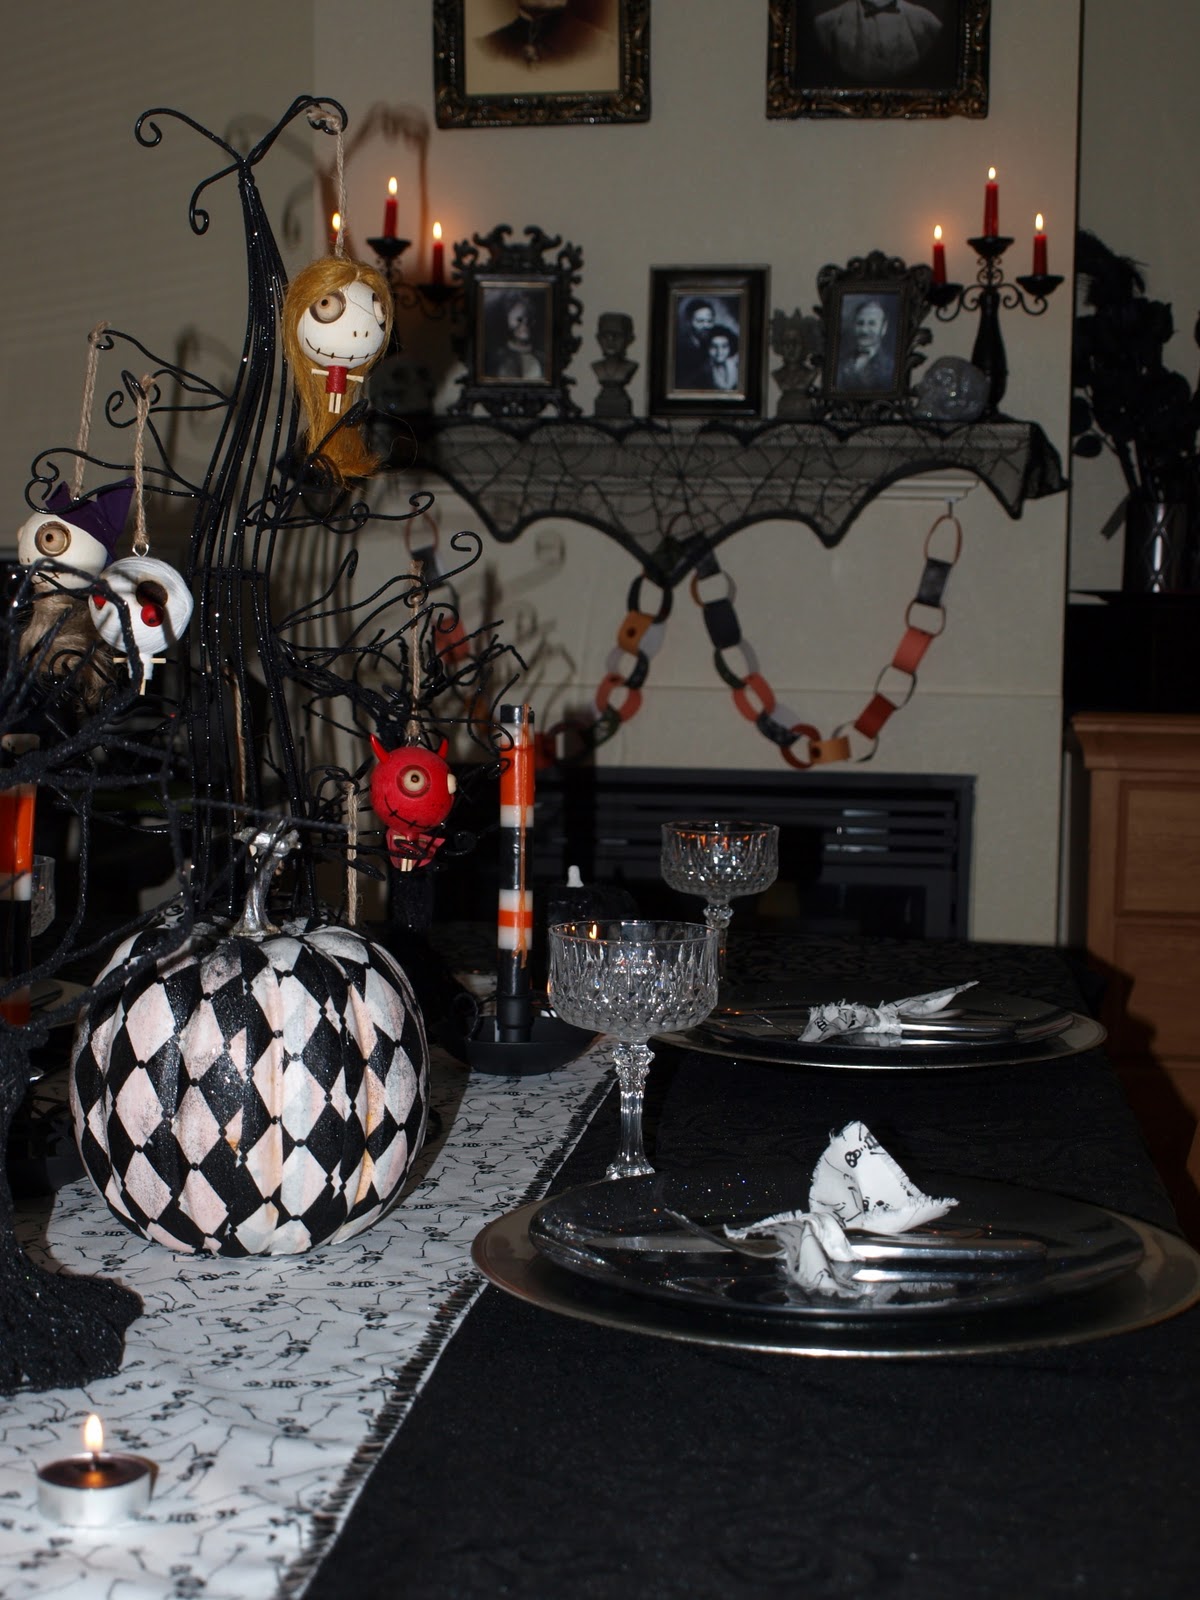 Nightmare Before Christmas Party Decorations